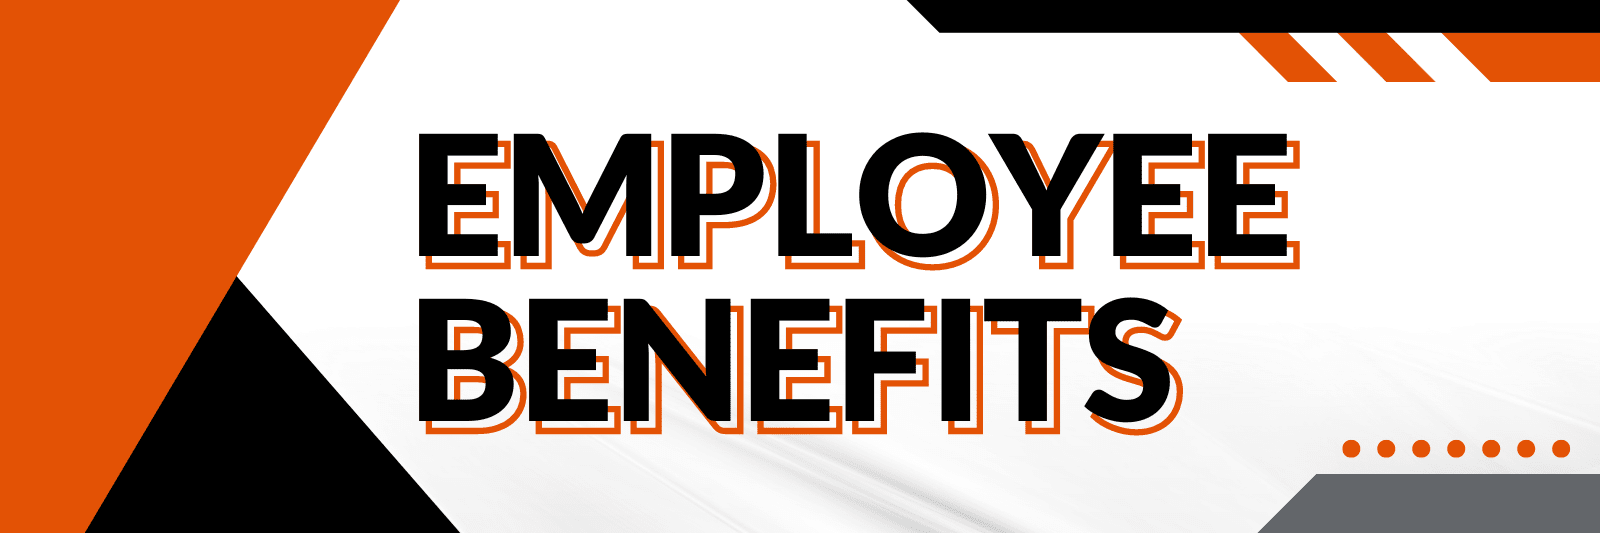 employee benefits header with geometric shapes in the back